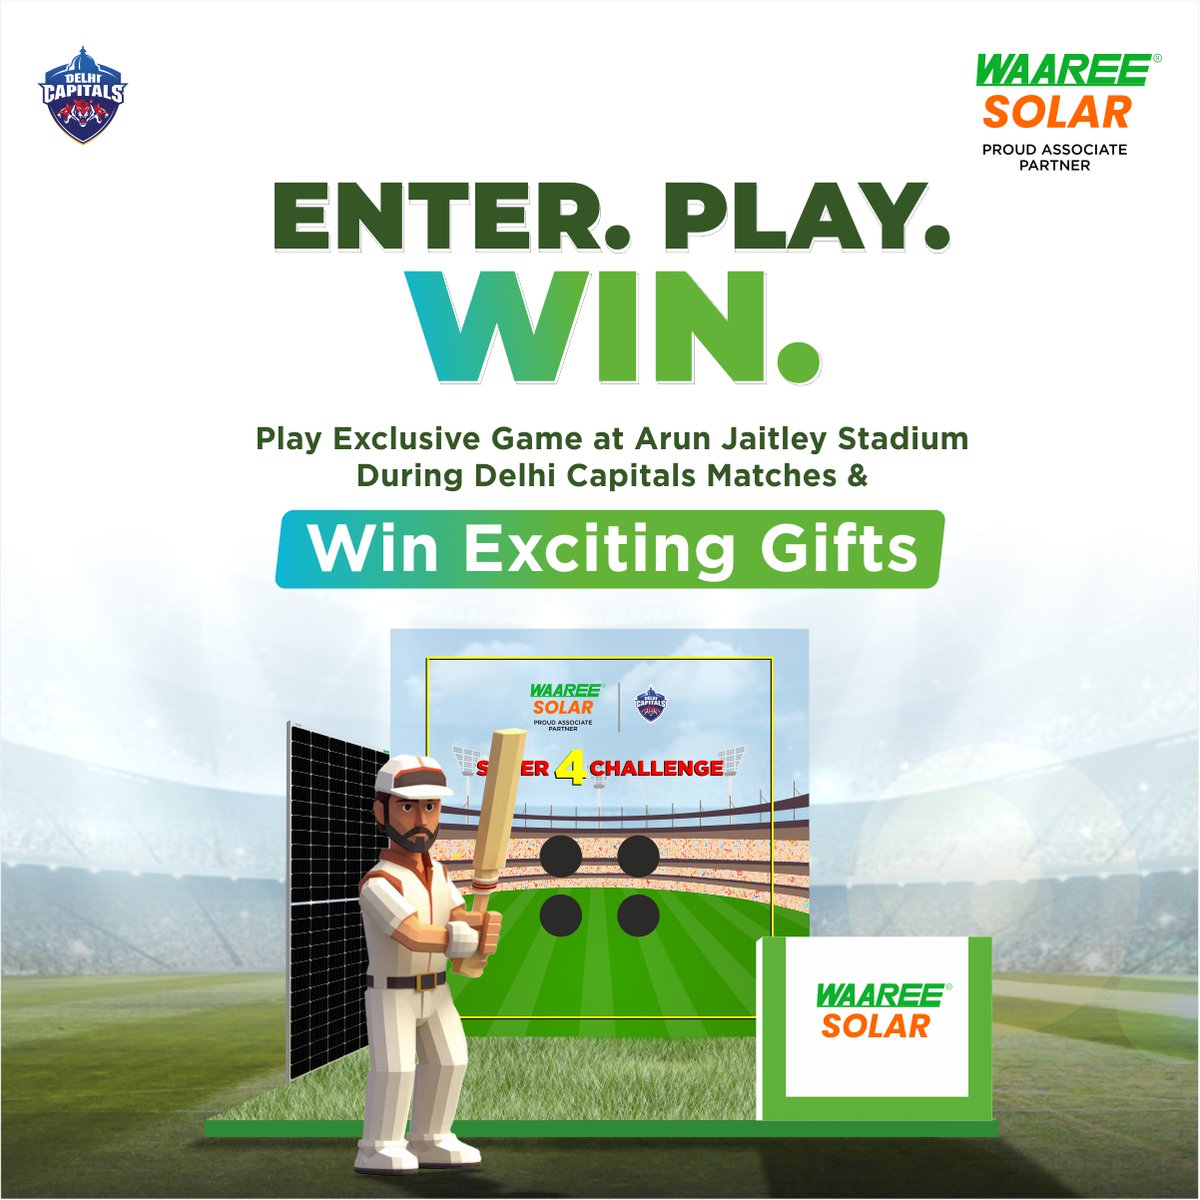 Enter, Play & Win
Enter the exclusive game zone at Arun Jaitley Stadium during Delhi Capitals matches in 2024. Play the interactive game and you could win exciting rewards! Don't miss out on this unique opportunity to engage with the match experience in a fun, competitive way.